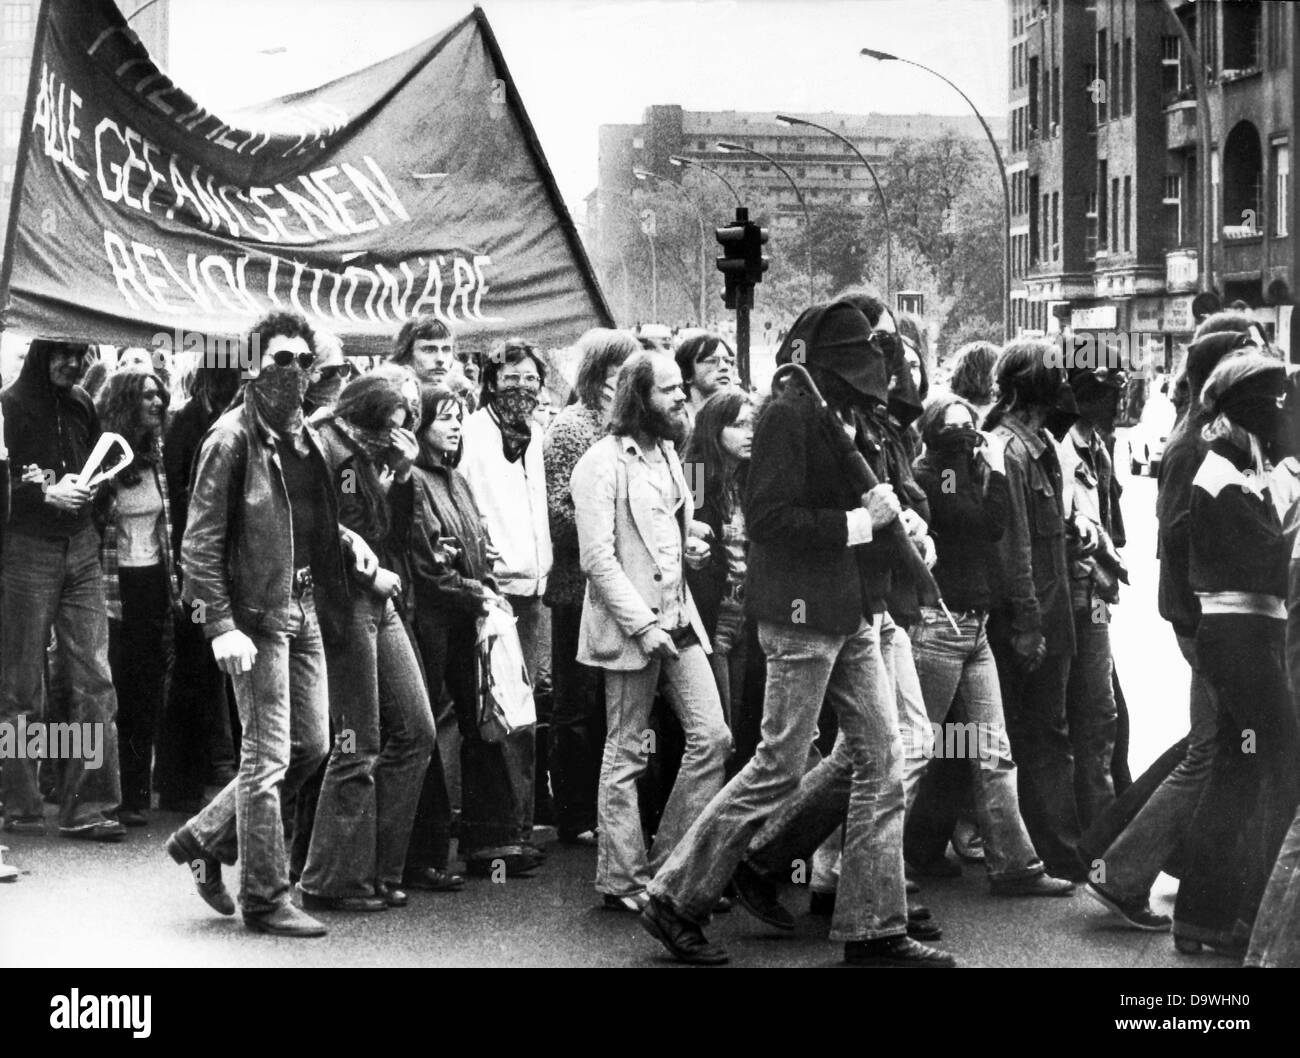 A group of about 4,500 partly hooded demonstrators marches through Berlin after Ulrike Meinhof's funeral on the 15th of May in 1976. The arrested RAF terrorist Ulrike Meinhof had committed suicide in her cell in Stuttgart-Stammheim on the 5th of May in 1976 and was buried on the 15th of May in 1976 in Berlin. Stock Photo